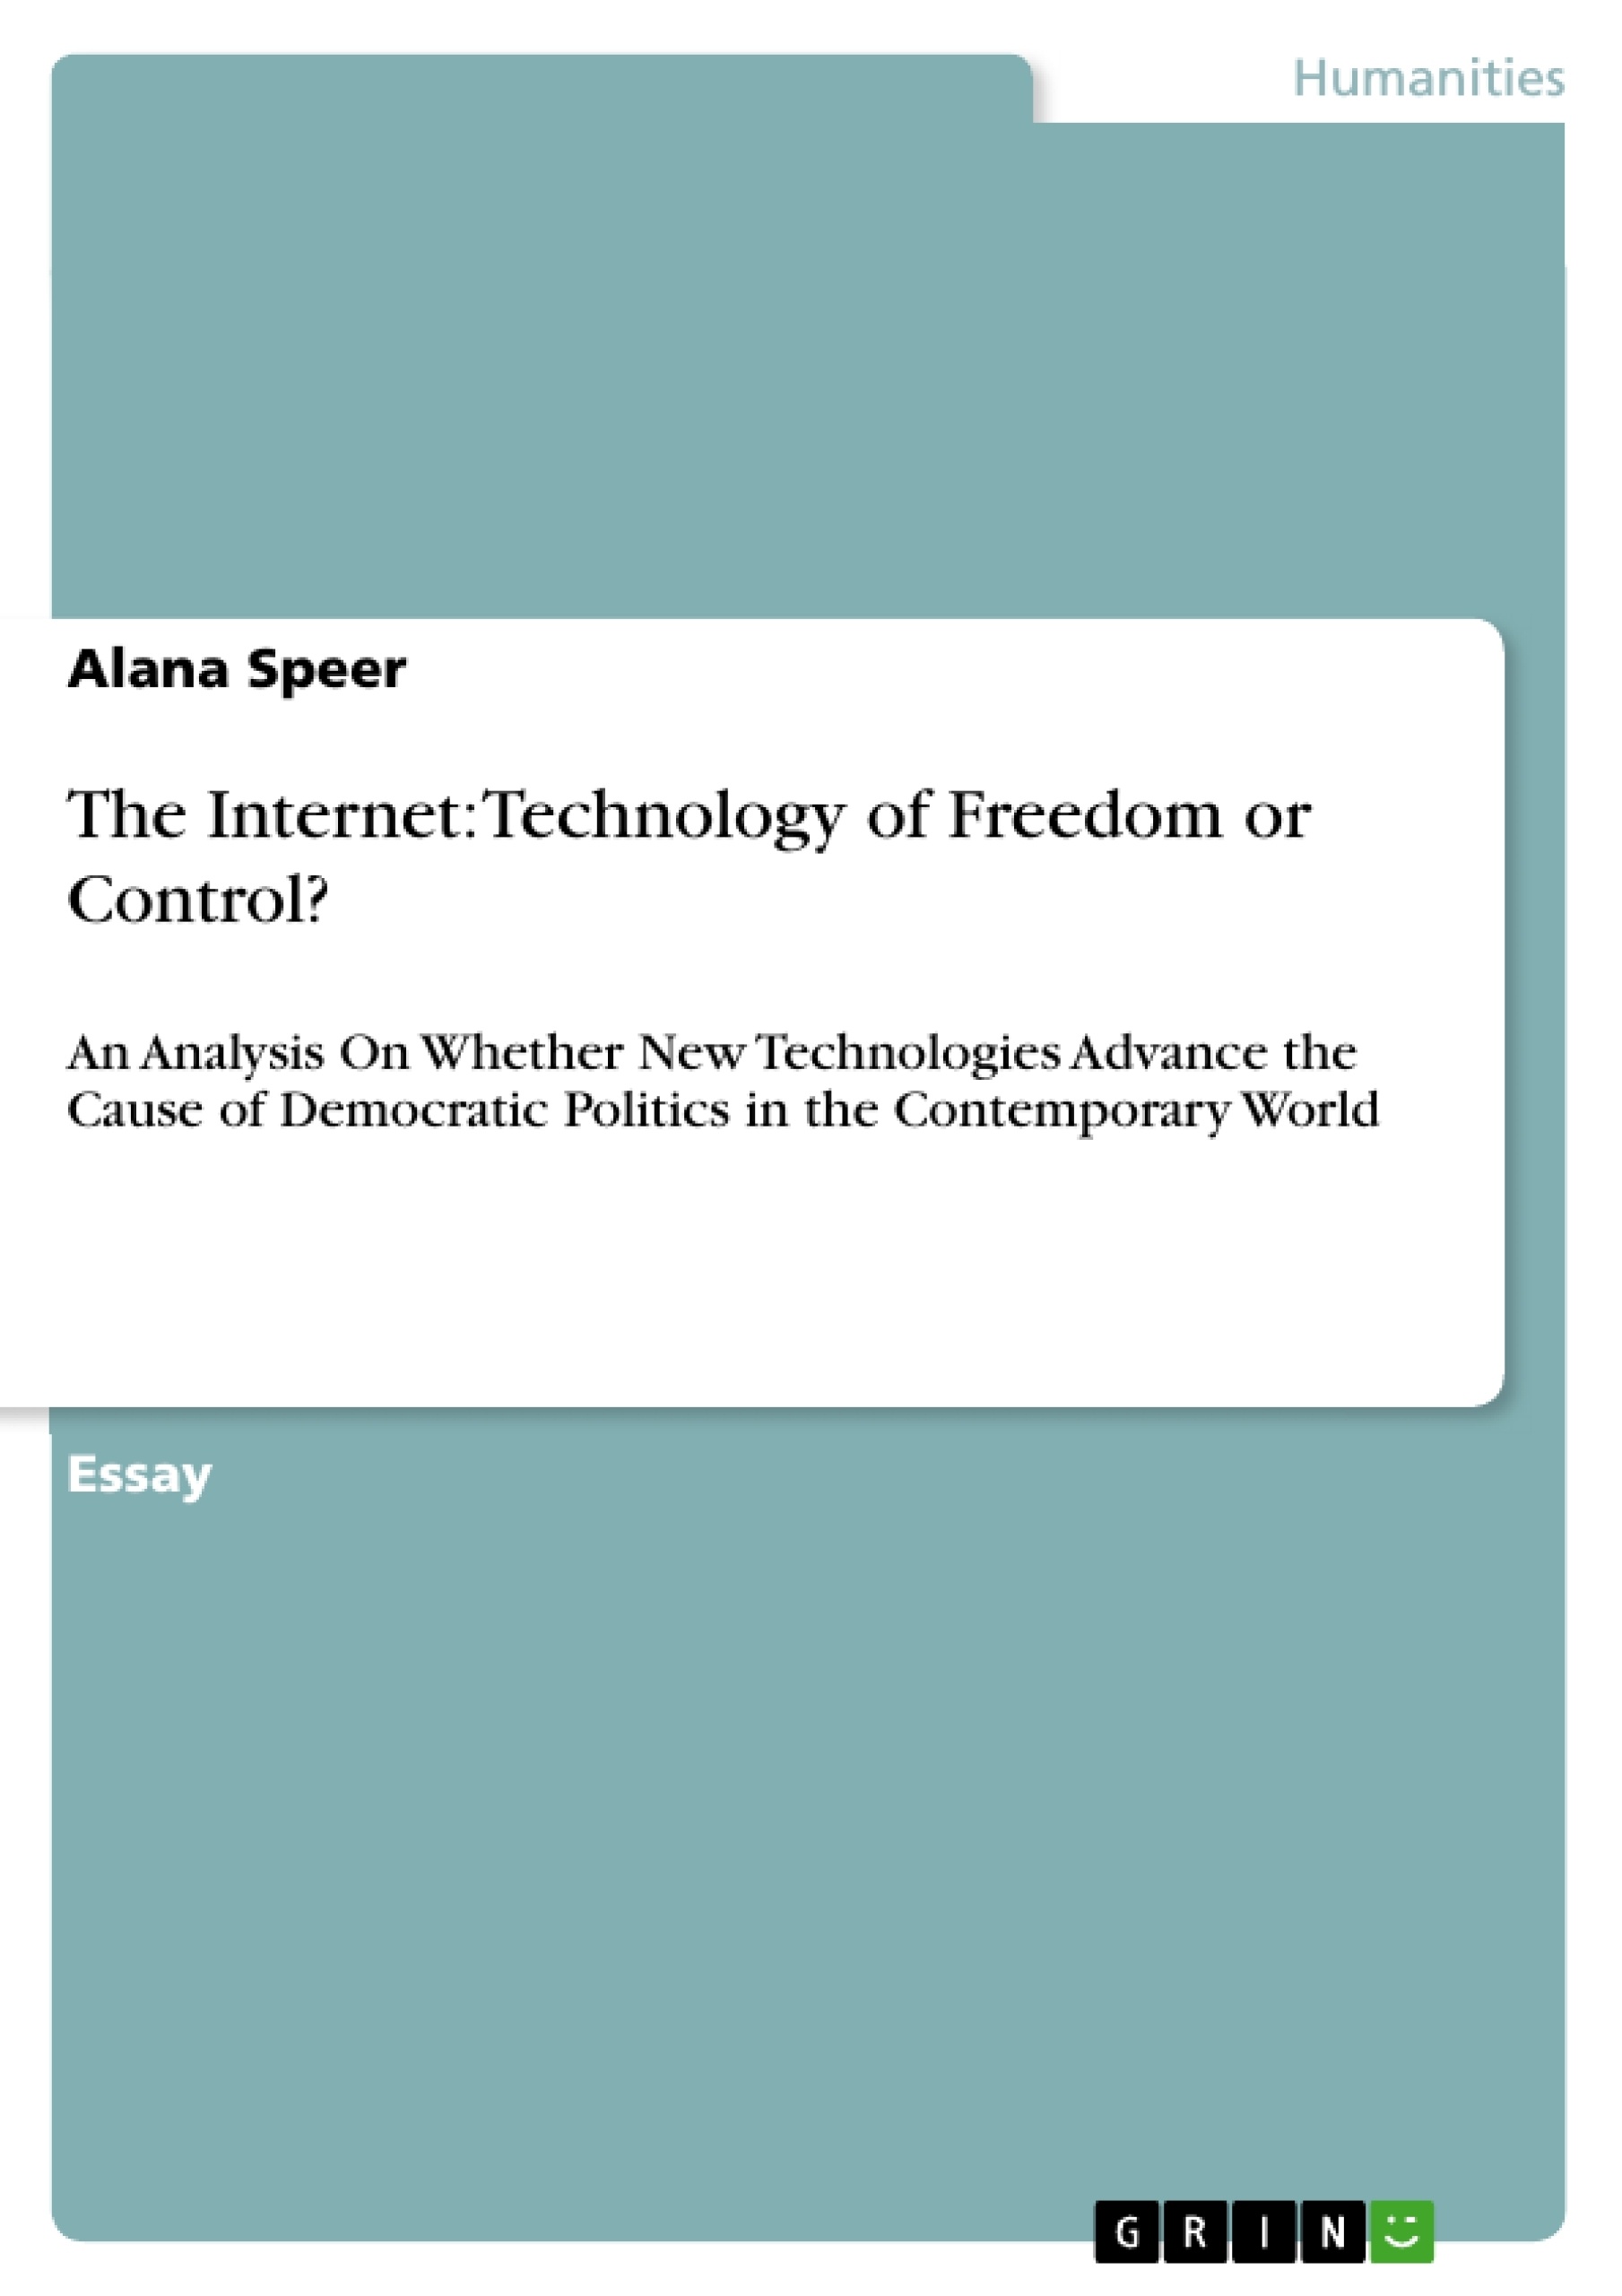 Título: The Internet: Technology of Freedom or Control?